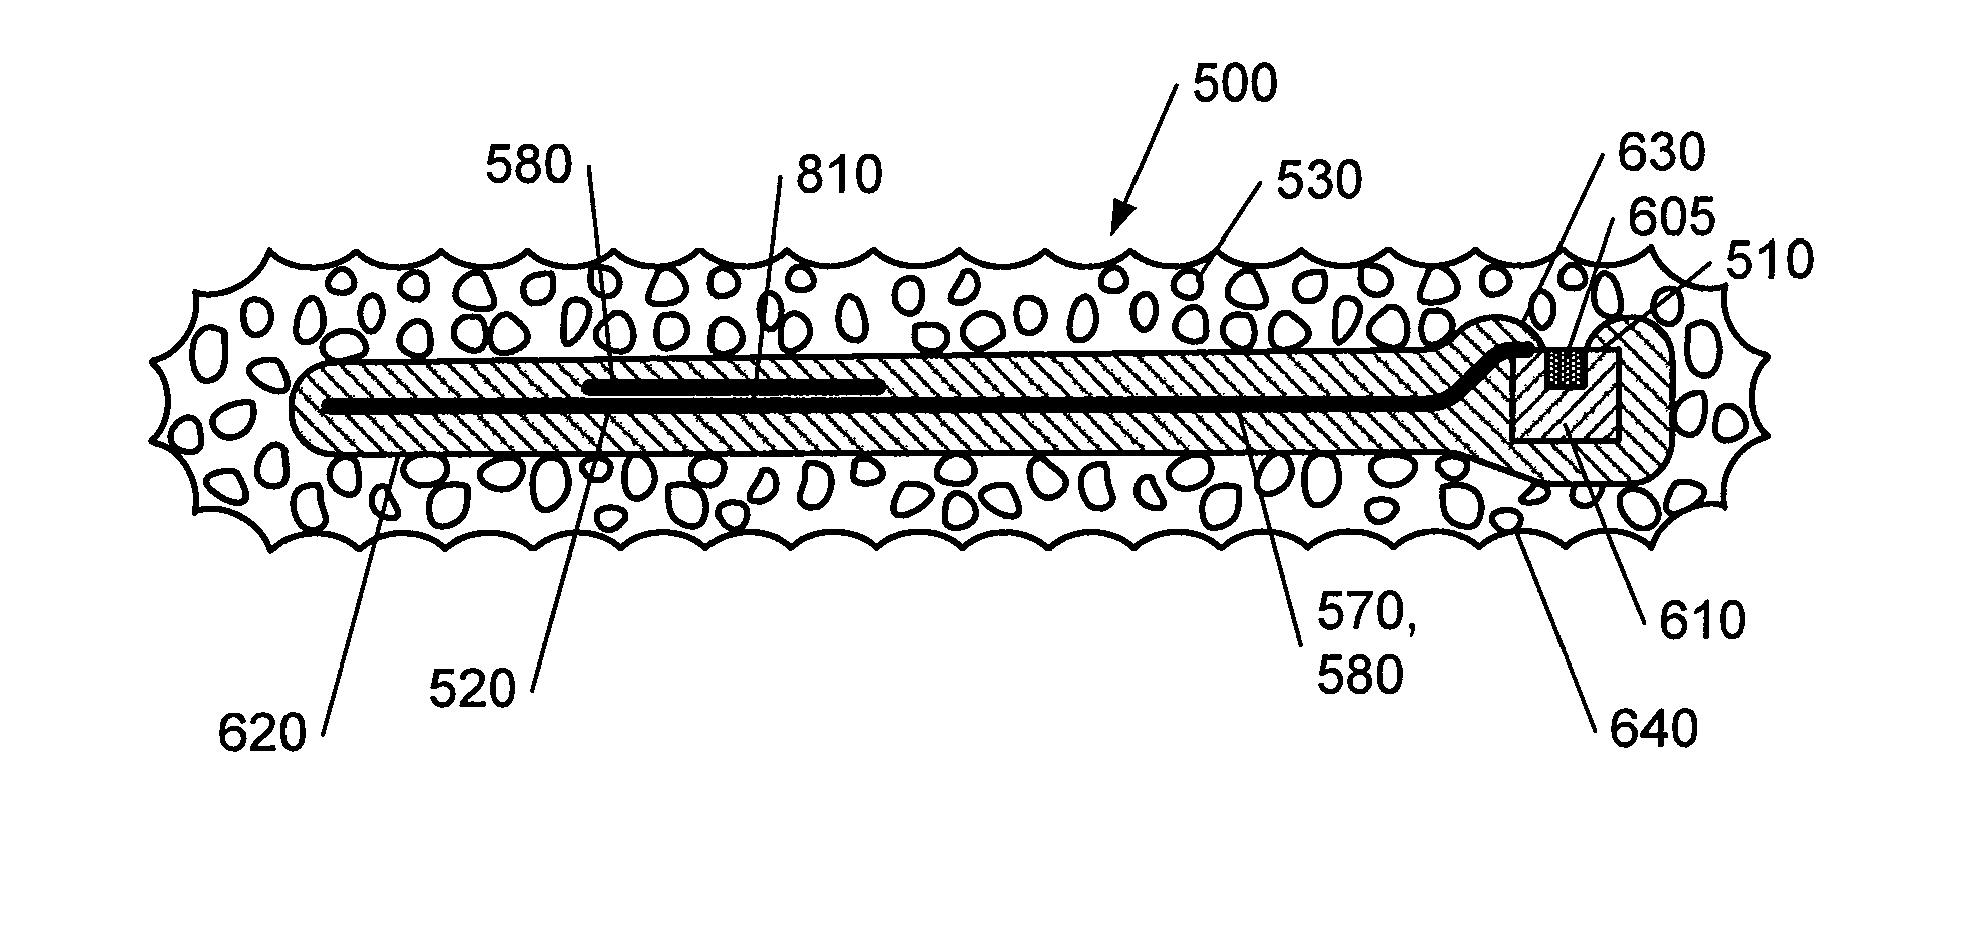 Device and method for glaucoma management and treatment